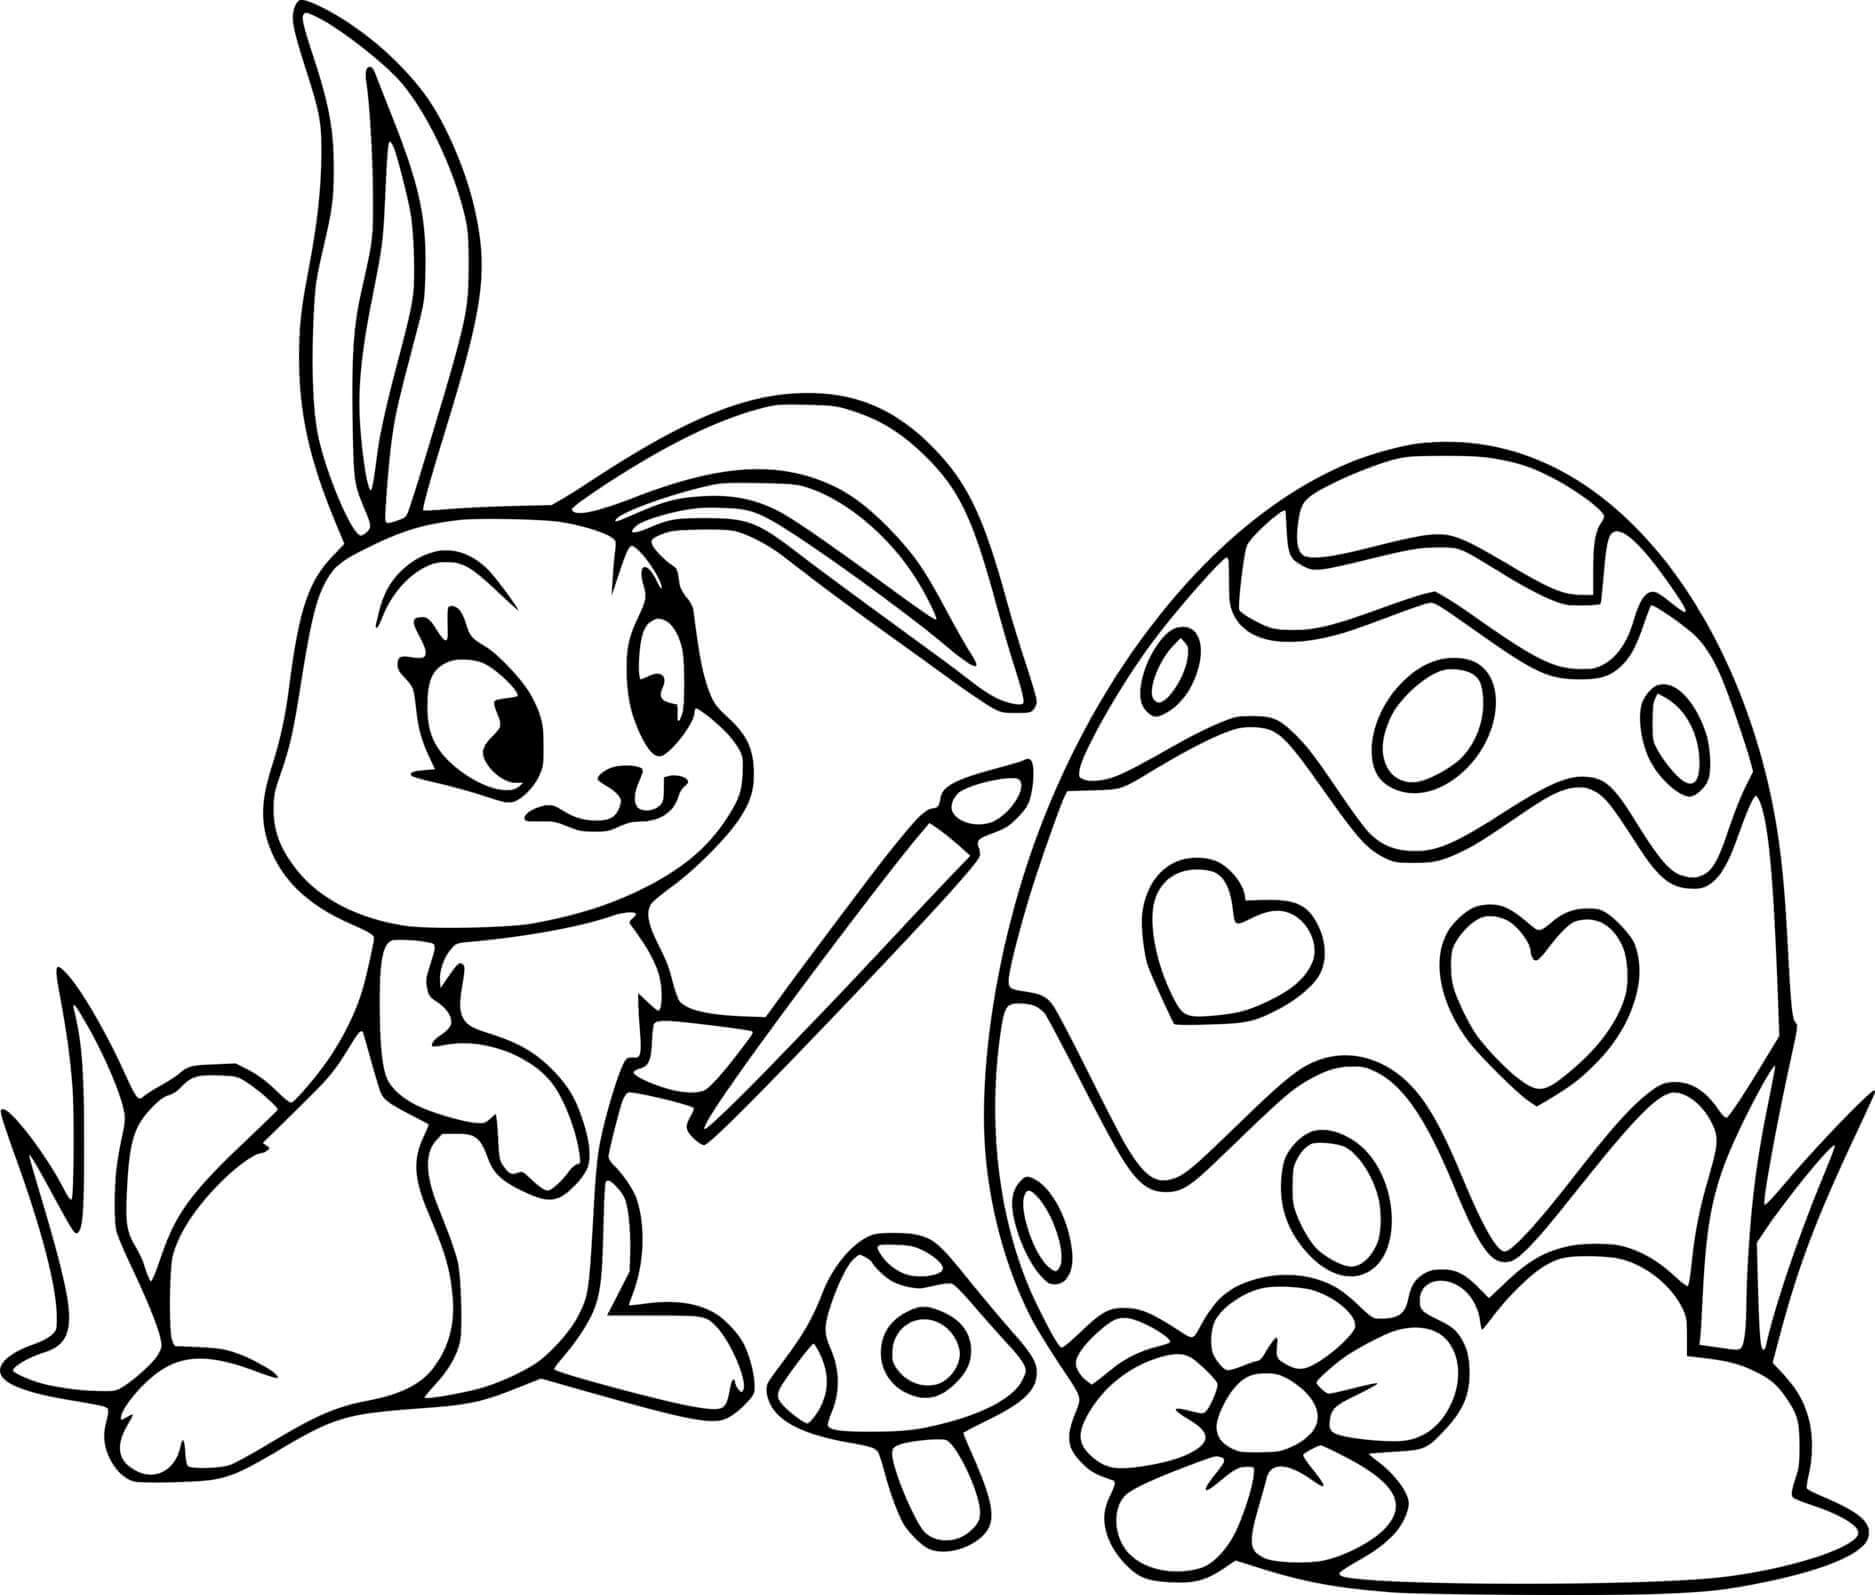 Cute Easter Bunny Painting The Egg